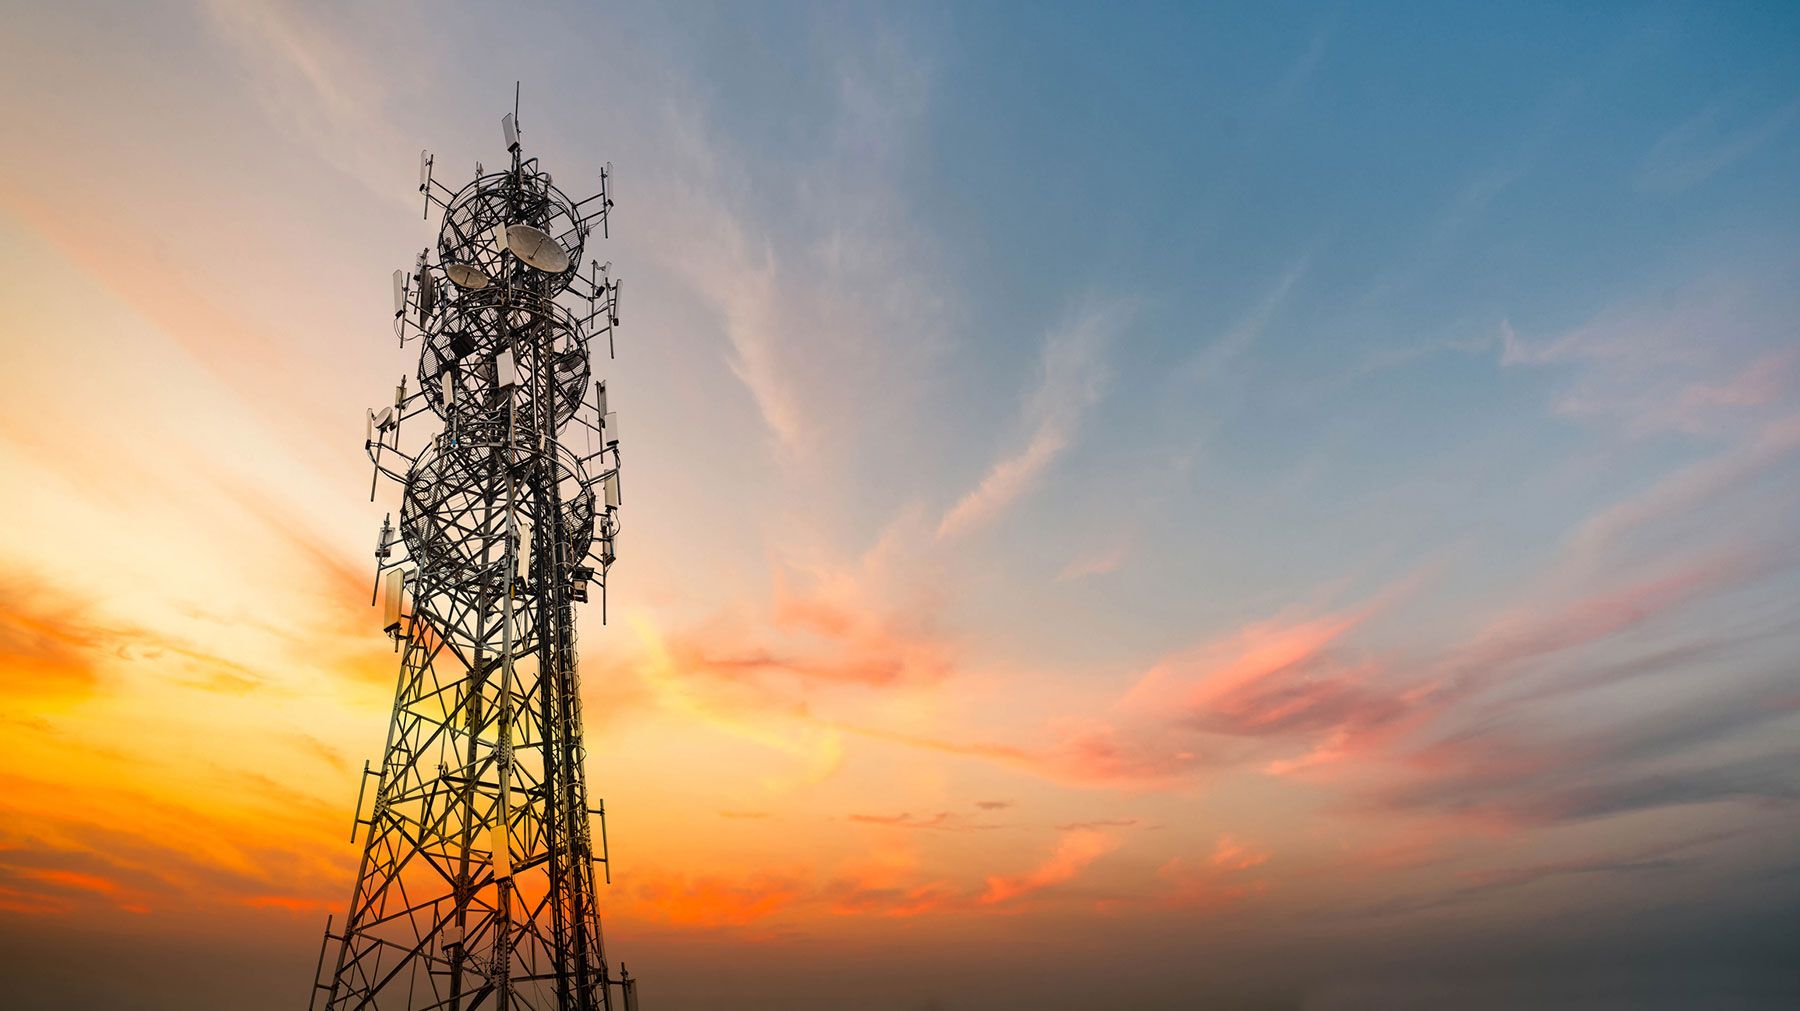 5G cellular tower at sunset